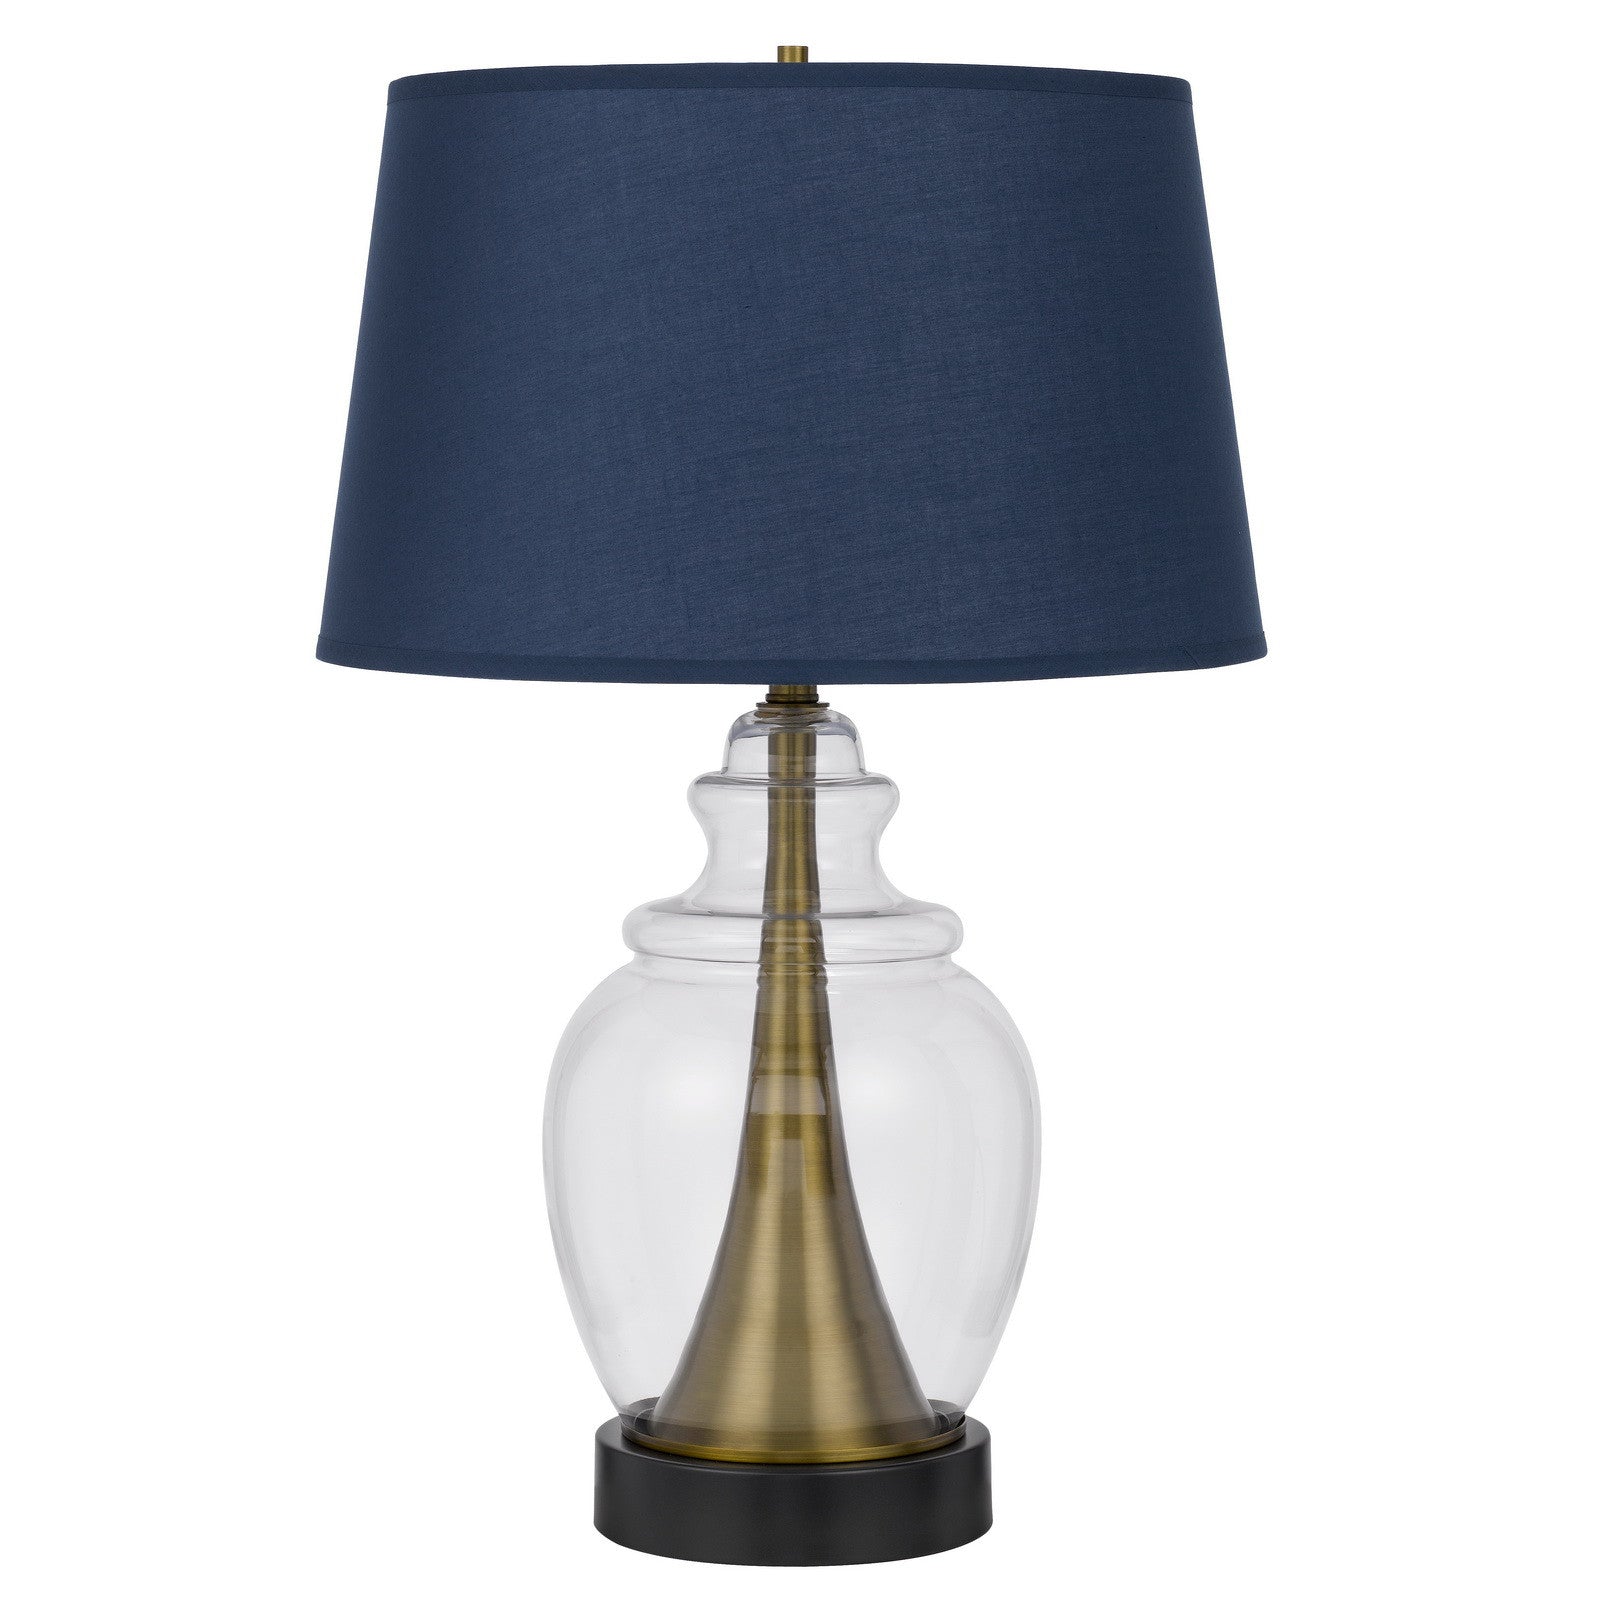 30" Antiqued Brass and Glass Table Lamp With Navy Blue Empire Shade